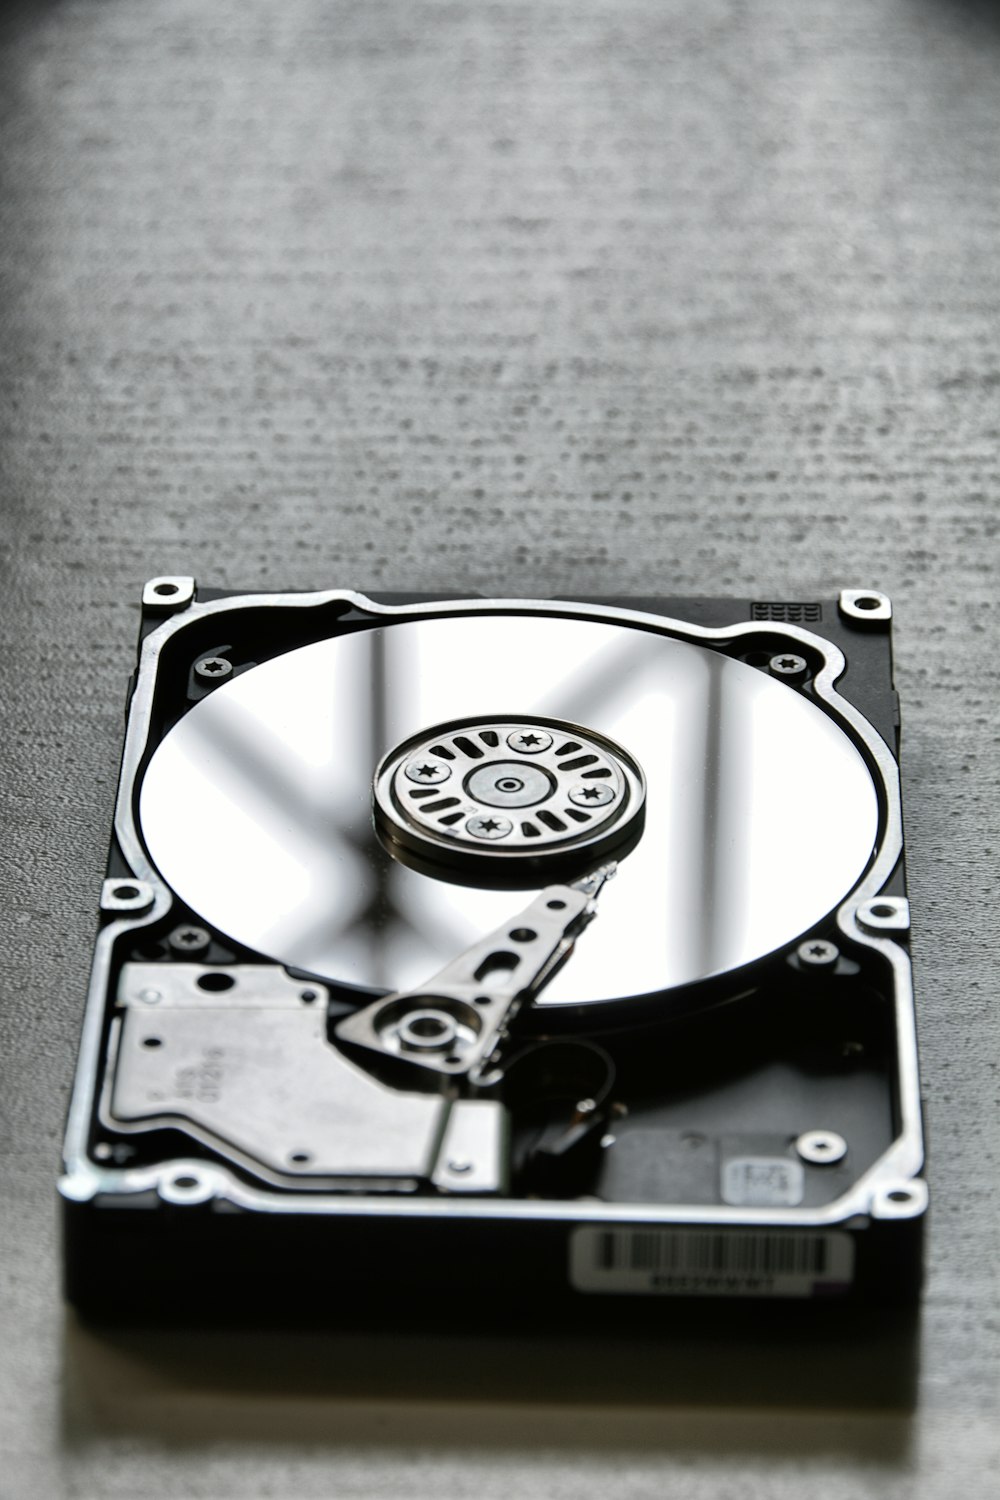 How much hard drive do i need for windows 10